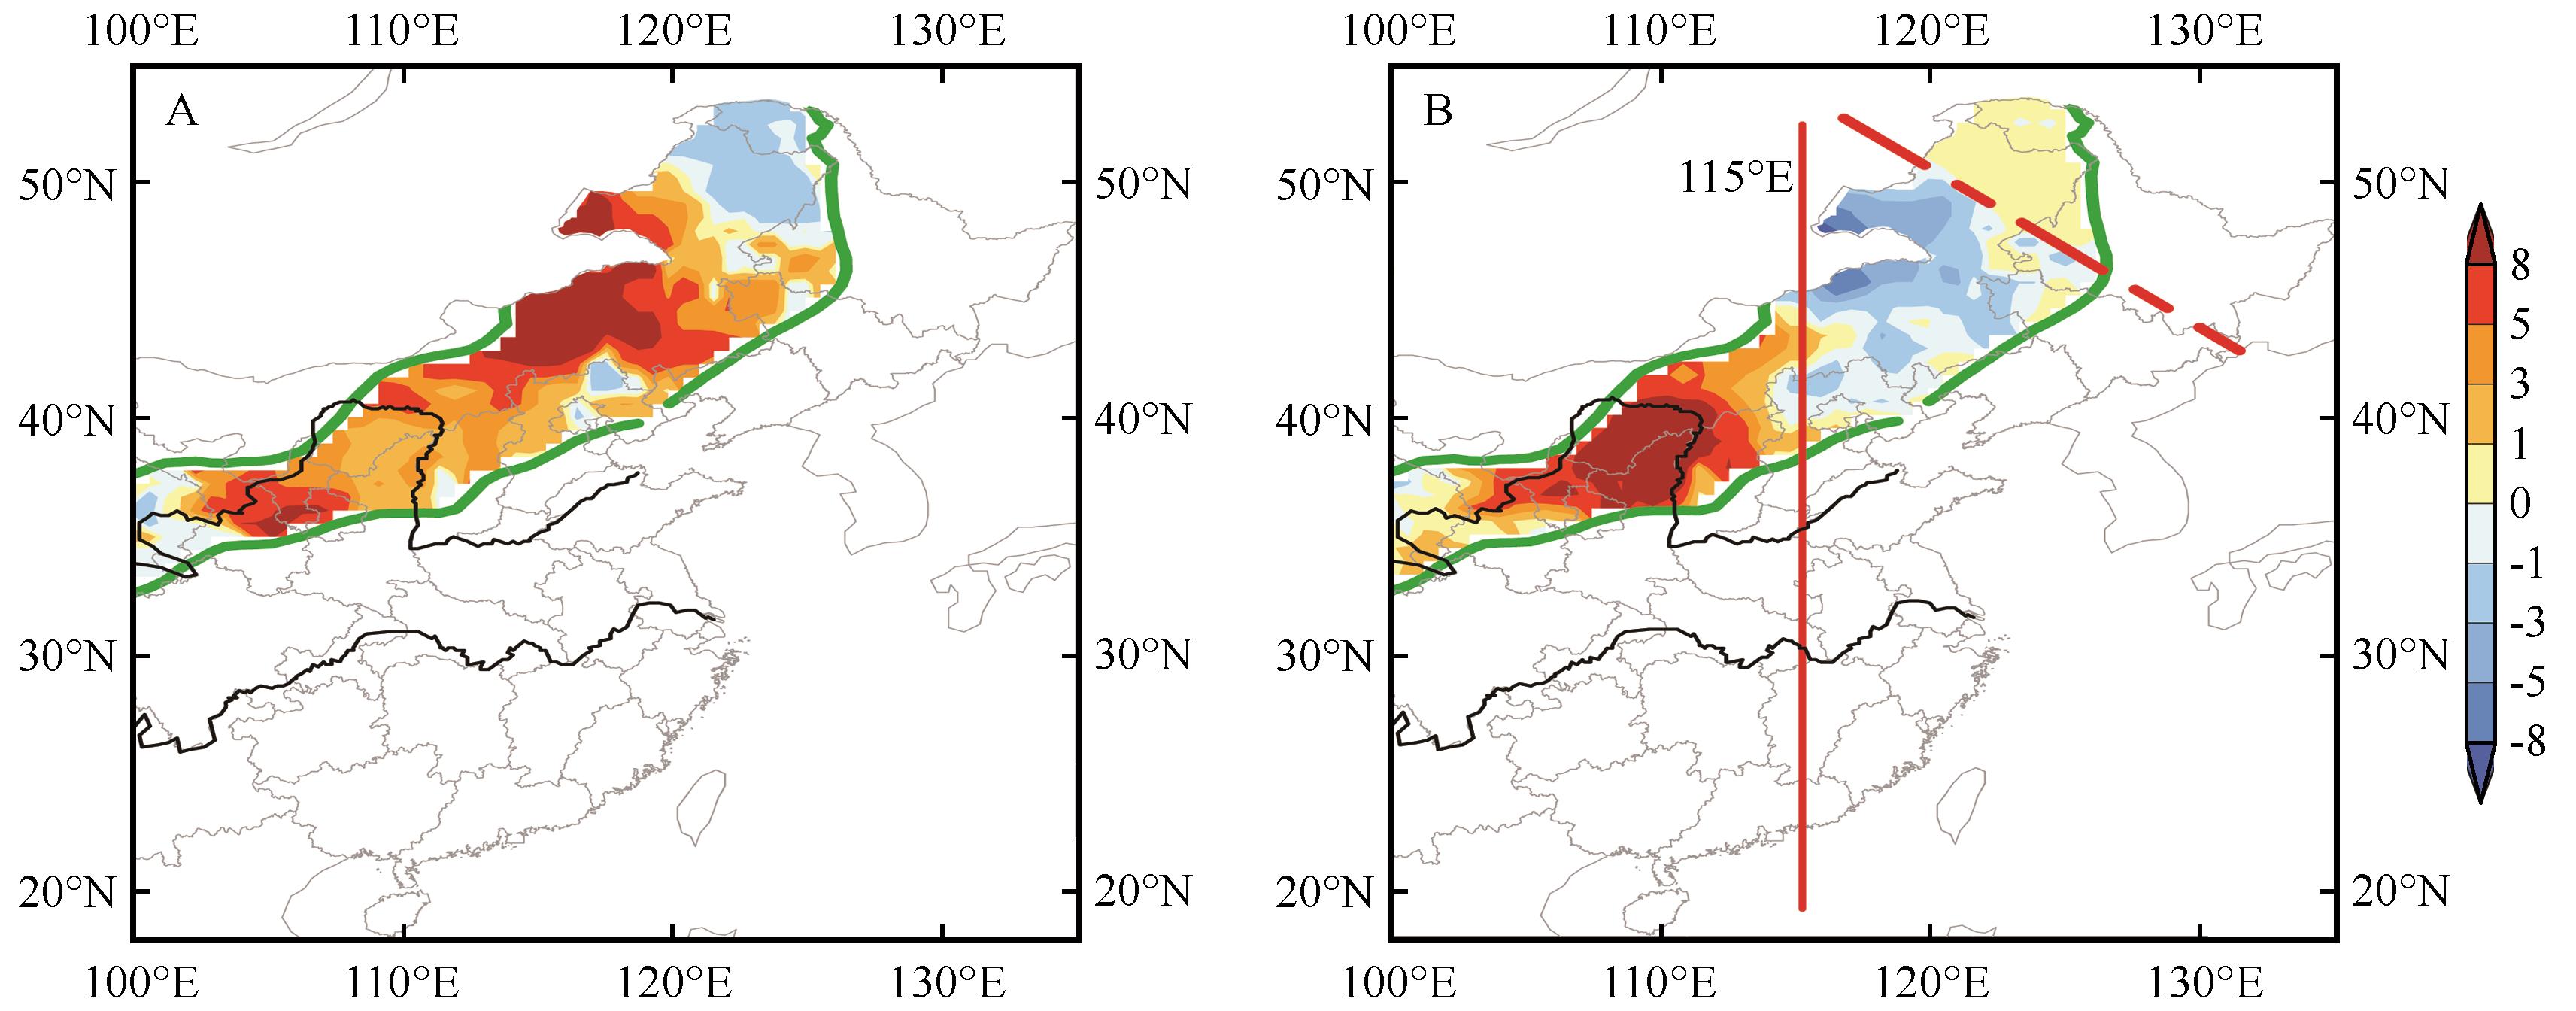 Response of surface evapotranspiration to the East Asian summer monsoon over the summer monsoon transition zone of China